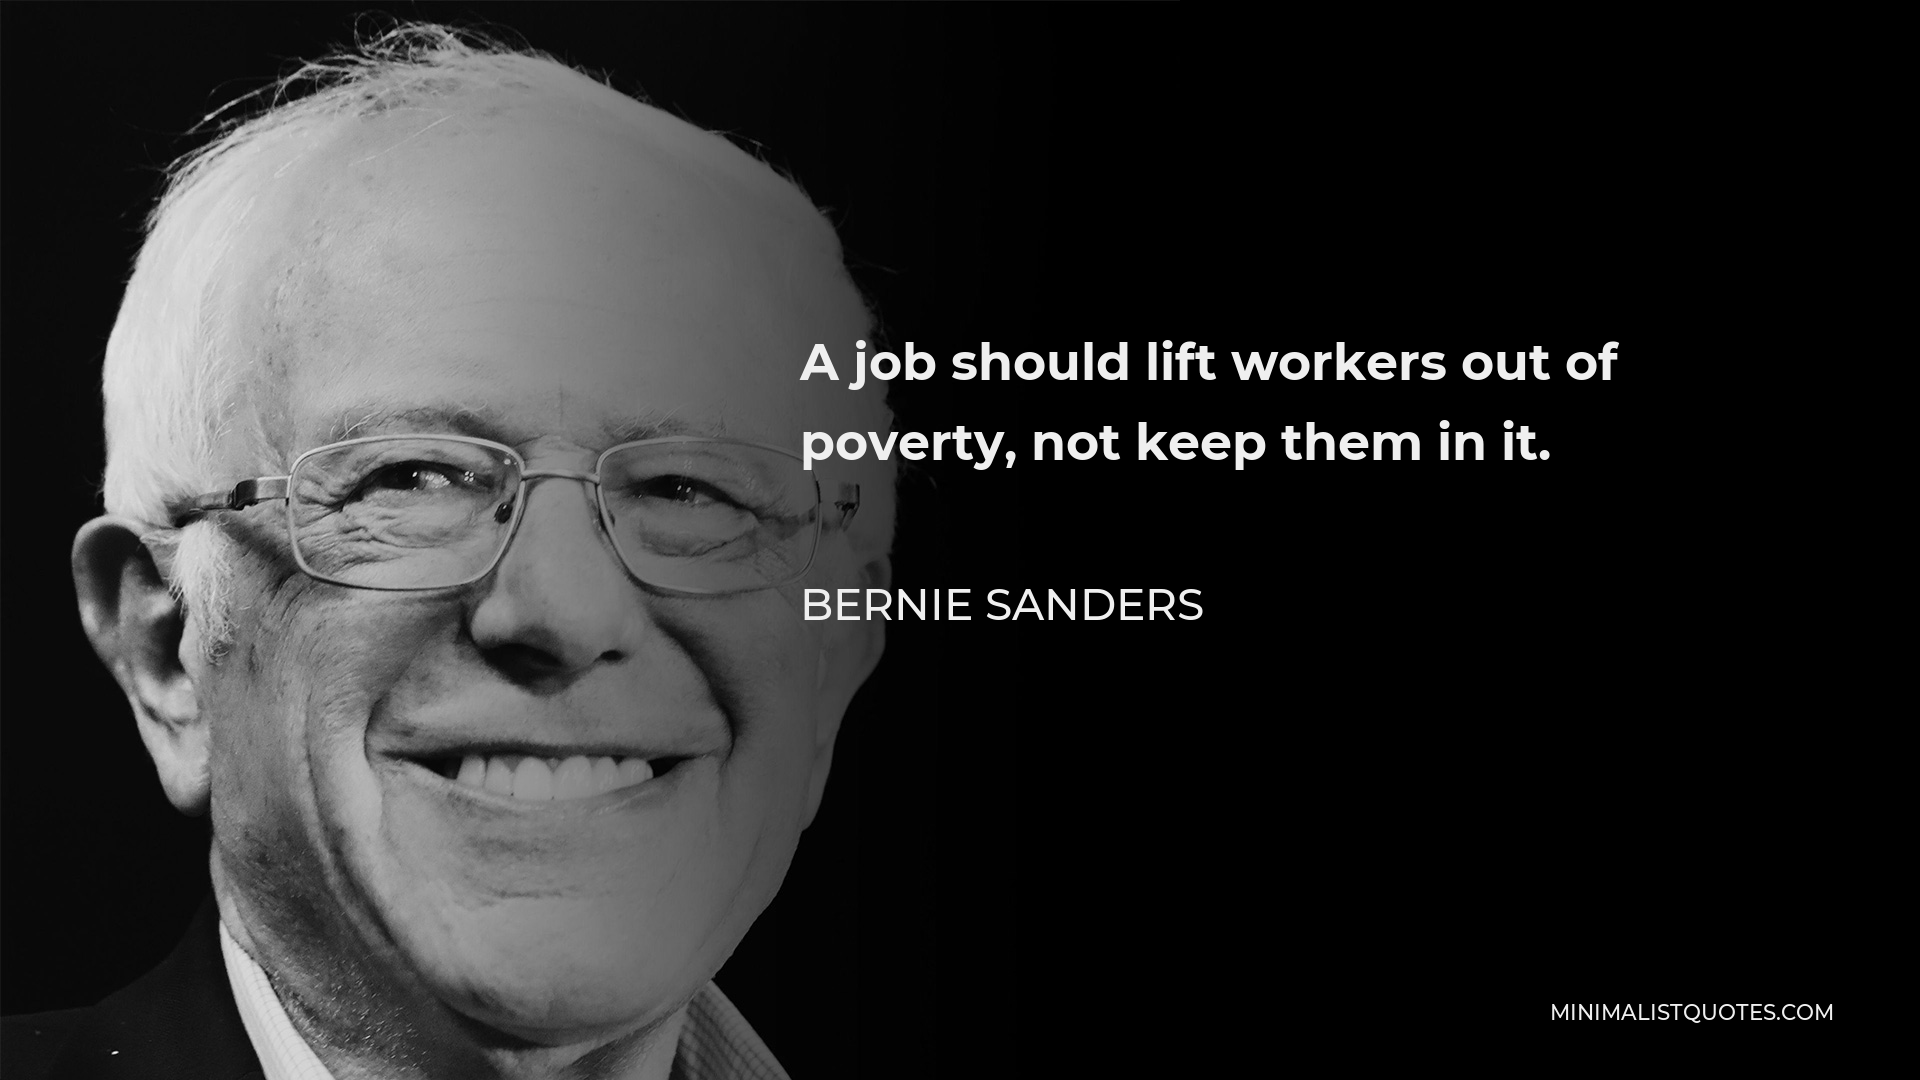 Bernie Sanders Quote - A job should lift workers out of poverty, not keep them in it.